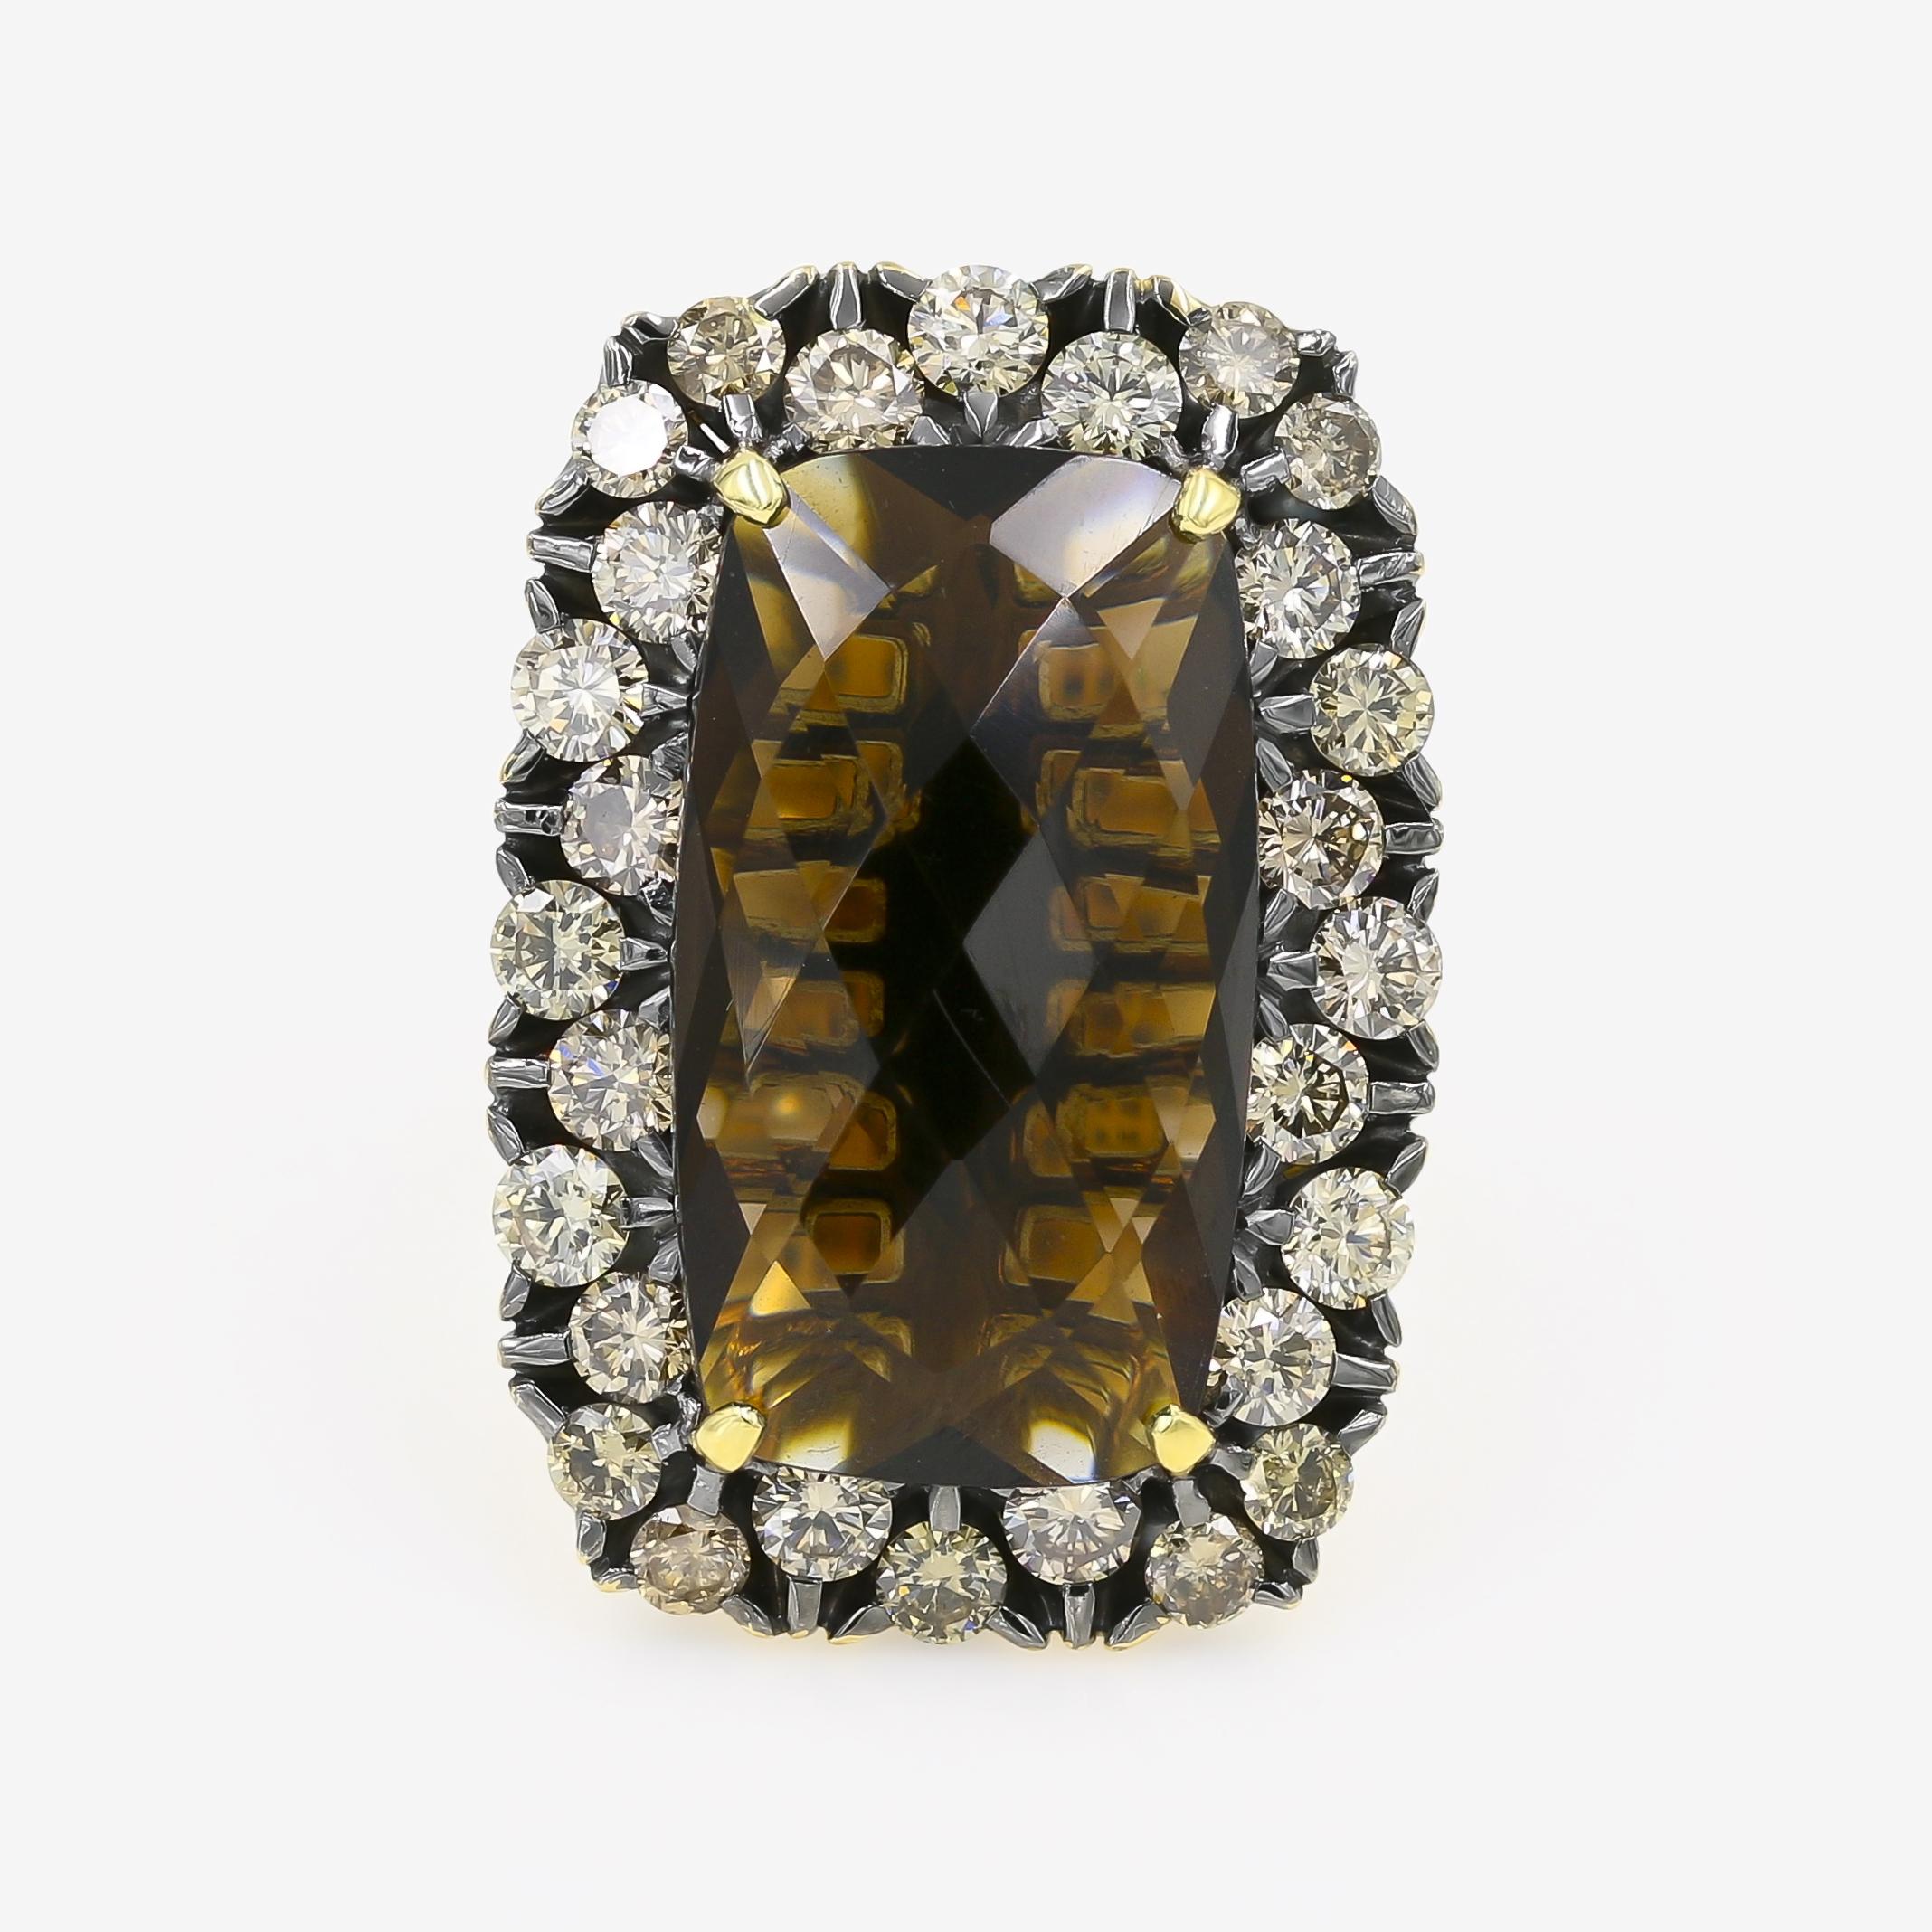 This 18kt. yellow gold ring has a rich brown rectangular faceted top smoky quartz center that is 16.00cts. Surrounding the center are 28 round brown diamonds=3.47cts. t.w. Ring is made by Garavelli of Italy.

Finger size is a 7 1/4, but can be sized